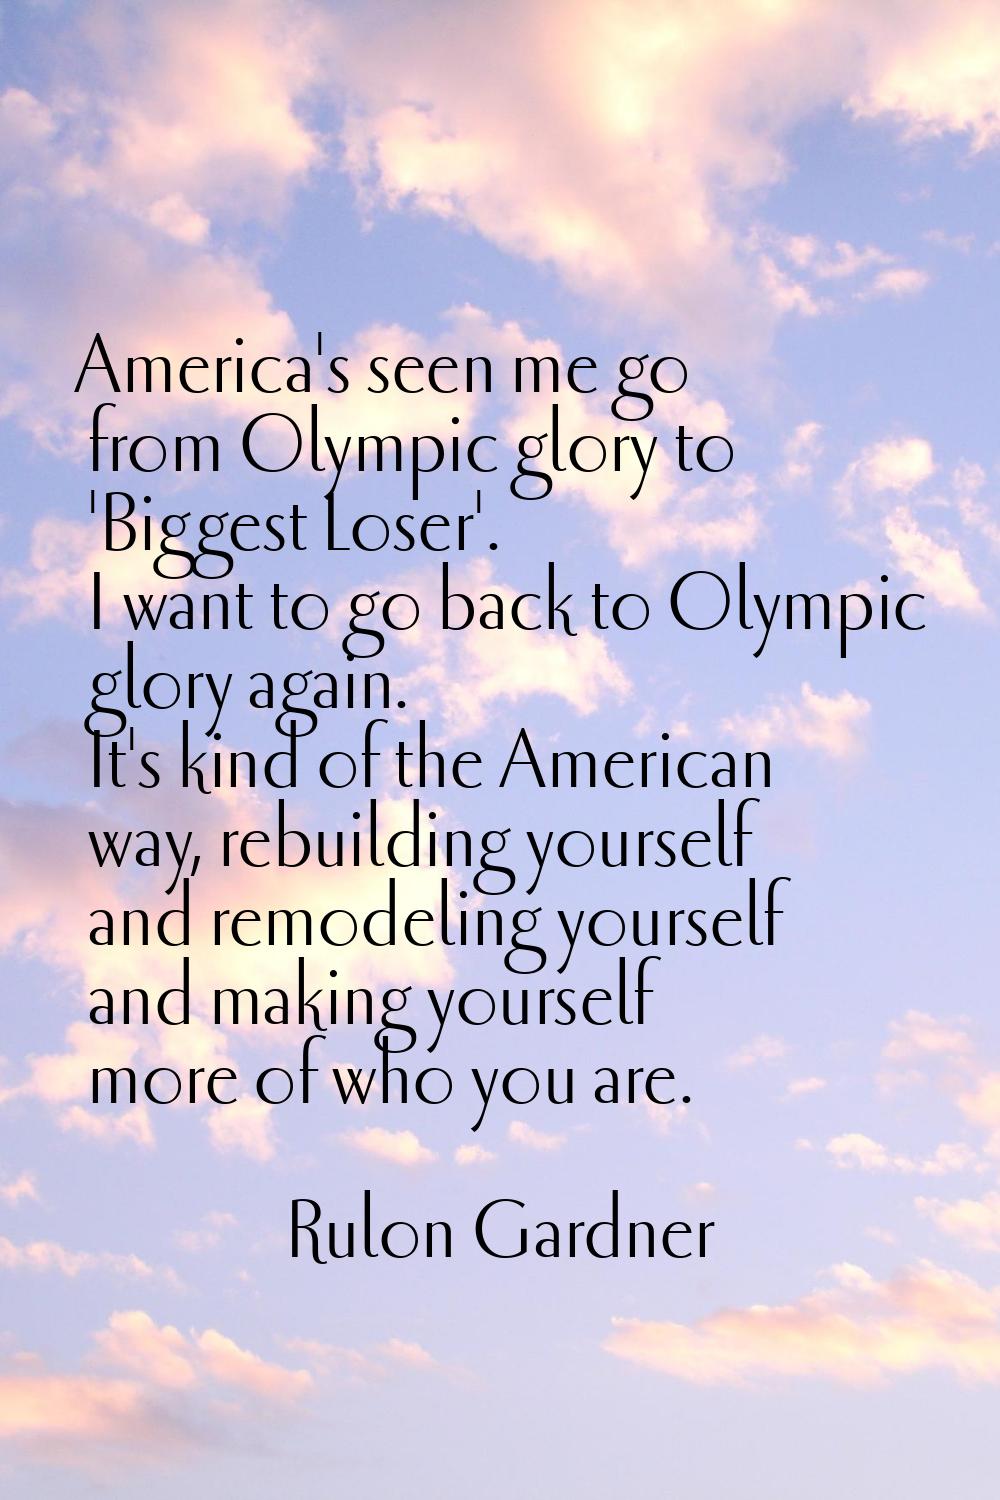 America's seen me go from Olympic glory to 'Biggest Loser'. I want to go back to Olympic glory agai